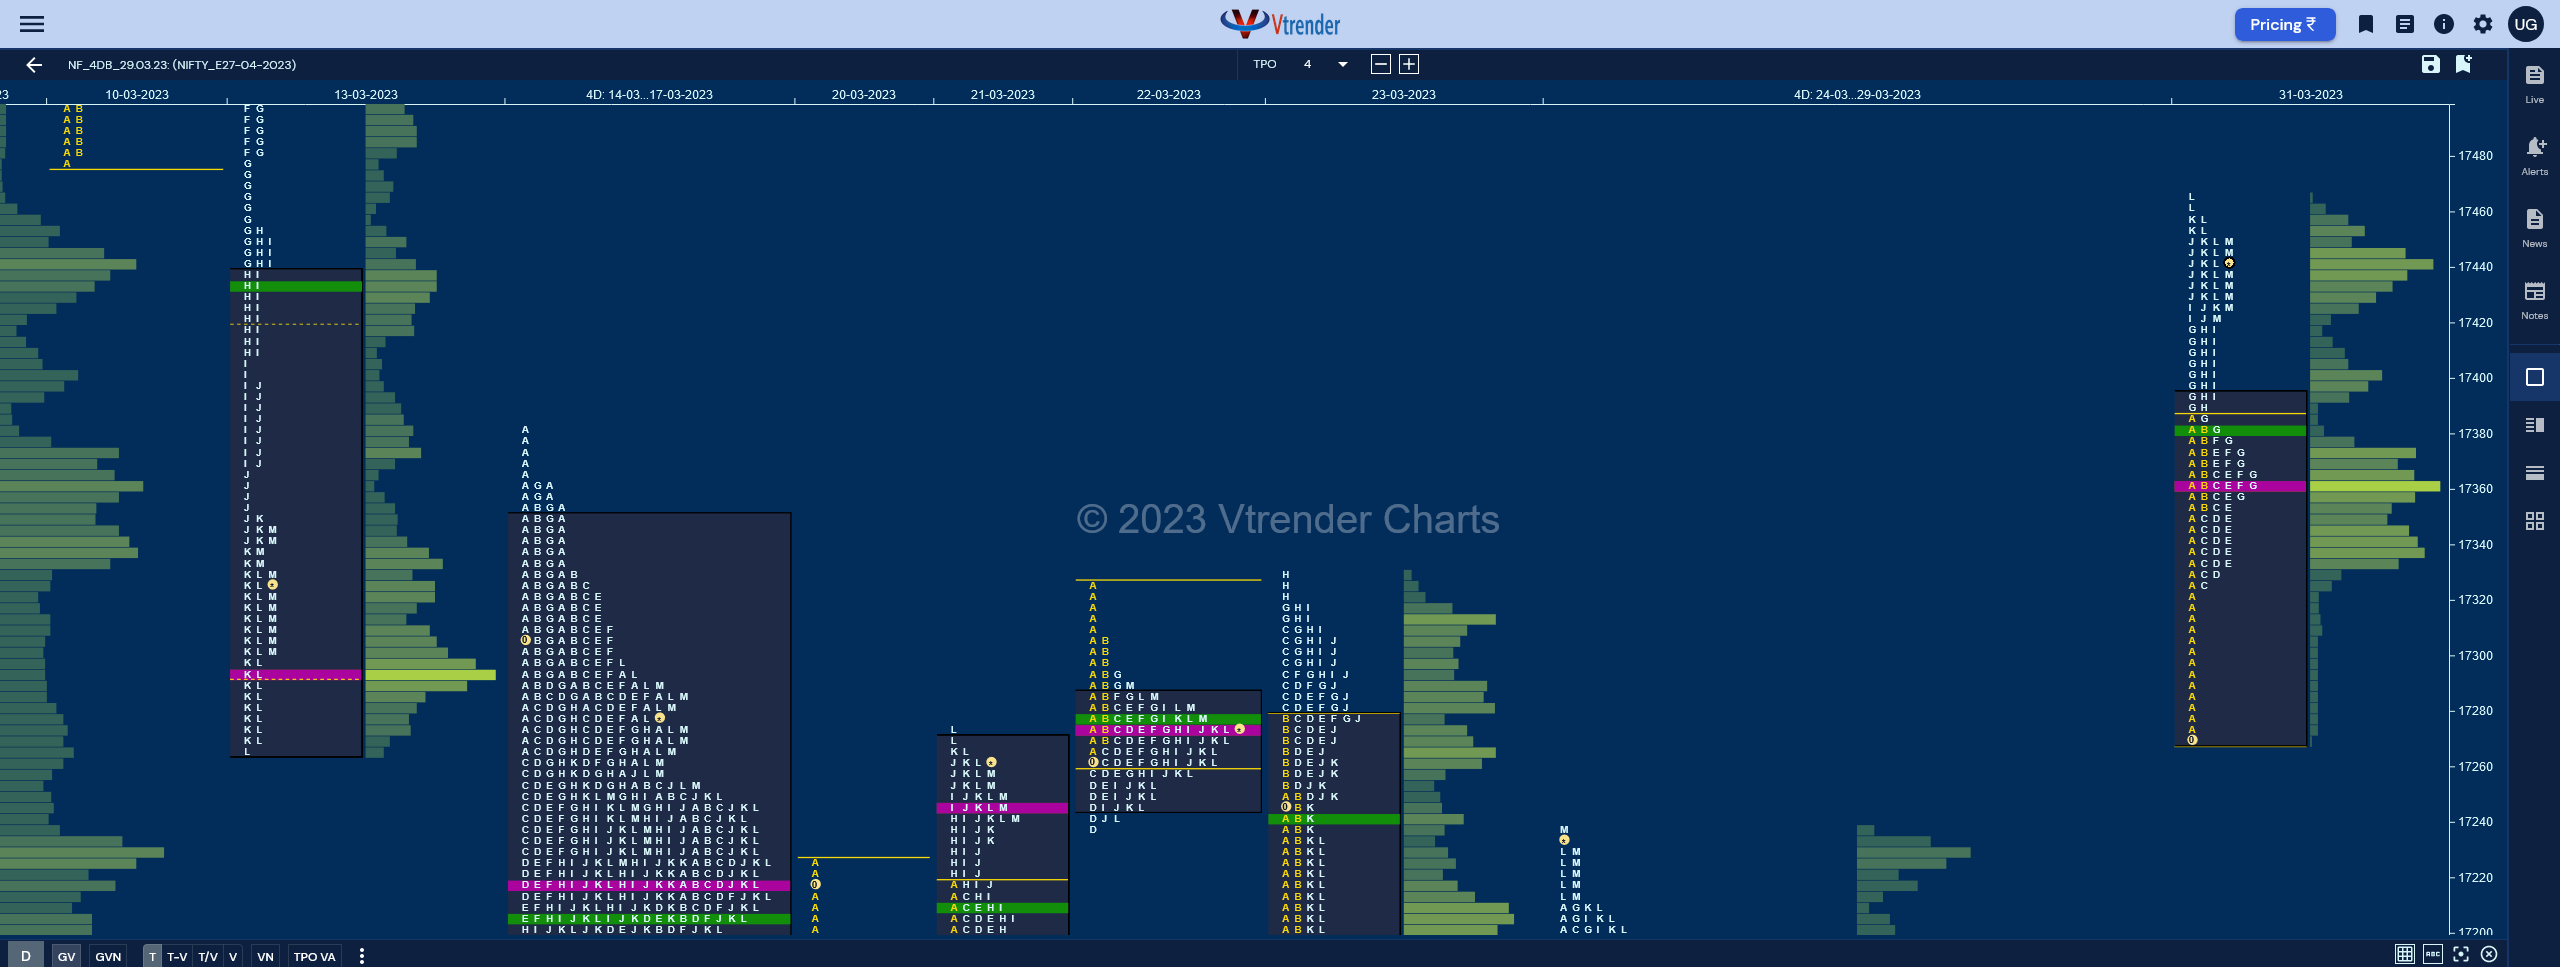 Nf Market Profile Analysis Dated 31St Mar 2023 Banknifty Futures, Charts, Day Trading, Intraday Trading, Intraday Trading Strategies, Market Profile, Market Profile Trading Strategies, Nifty Futures, Order Flow Analysis, Support And Resistance, Technical Analysis, Trading Strategies, Volume Profile Trading